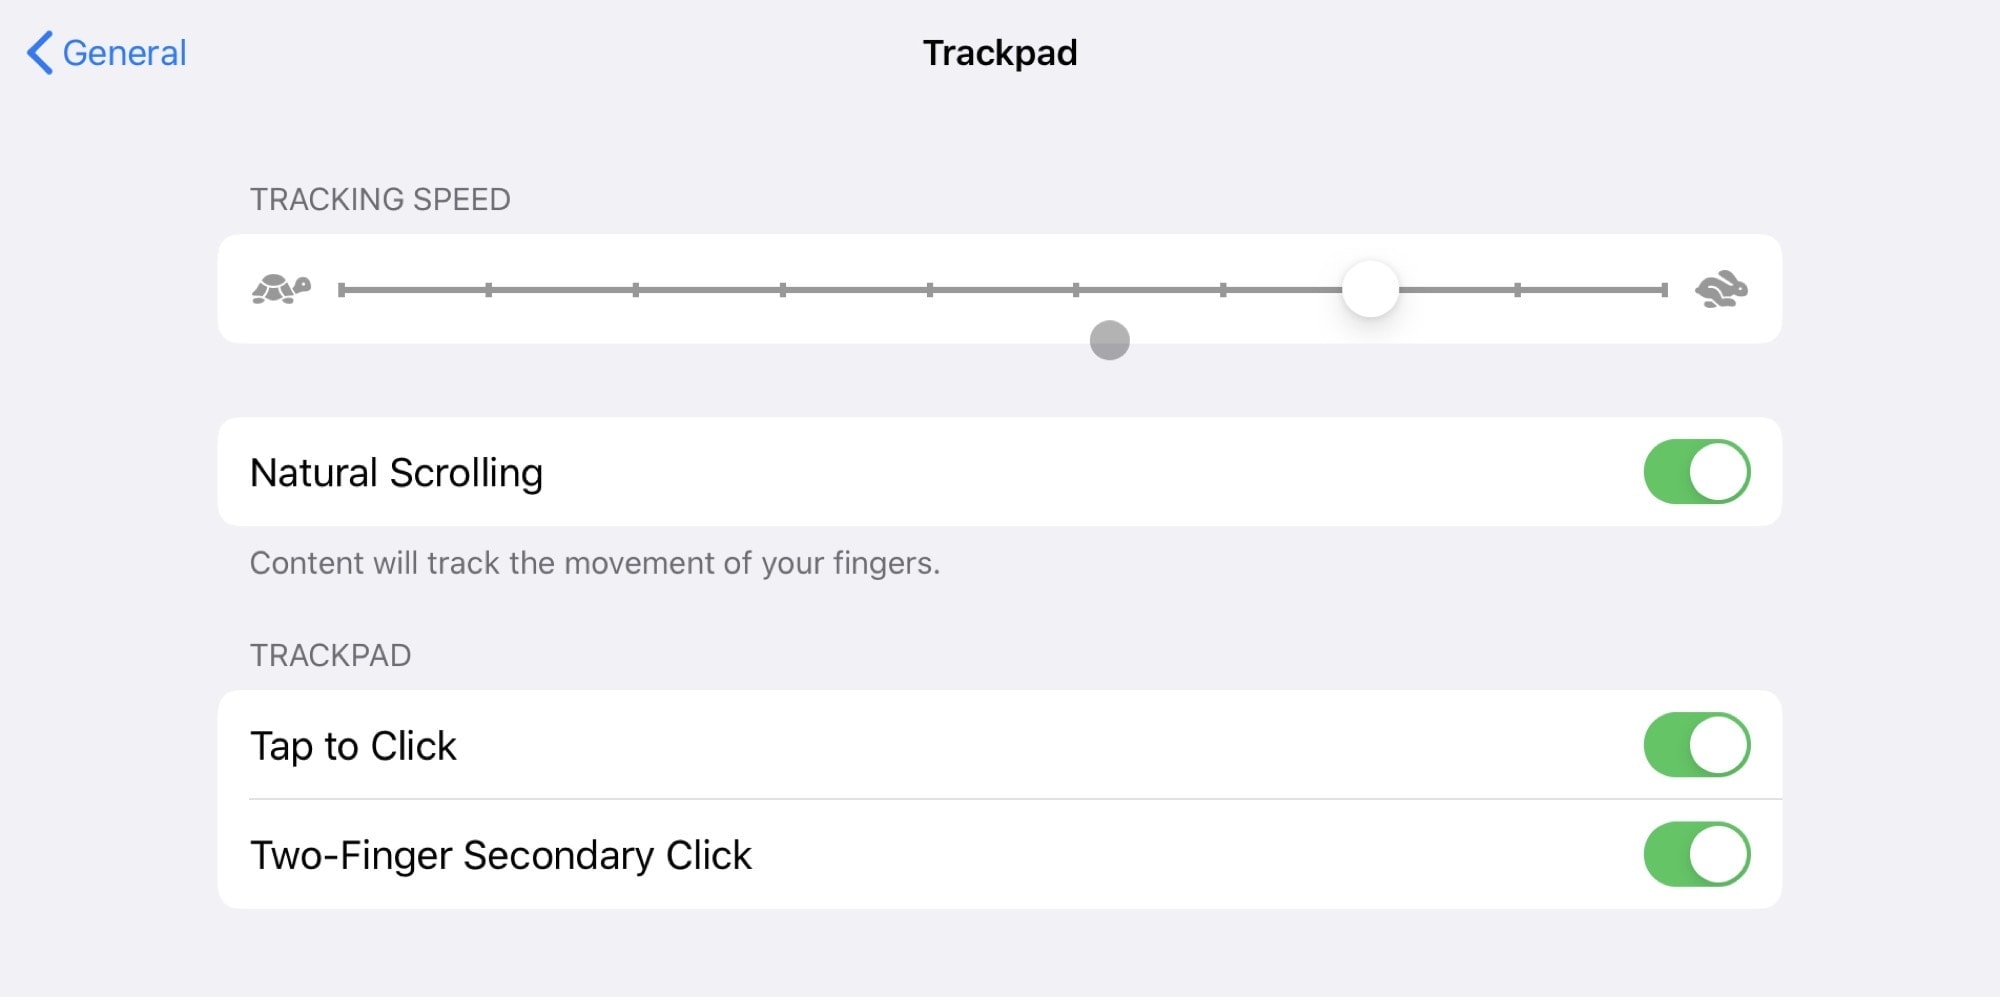 The regular trackpad settings offer several ways to customize iPad trackpad options.